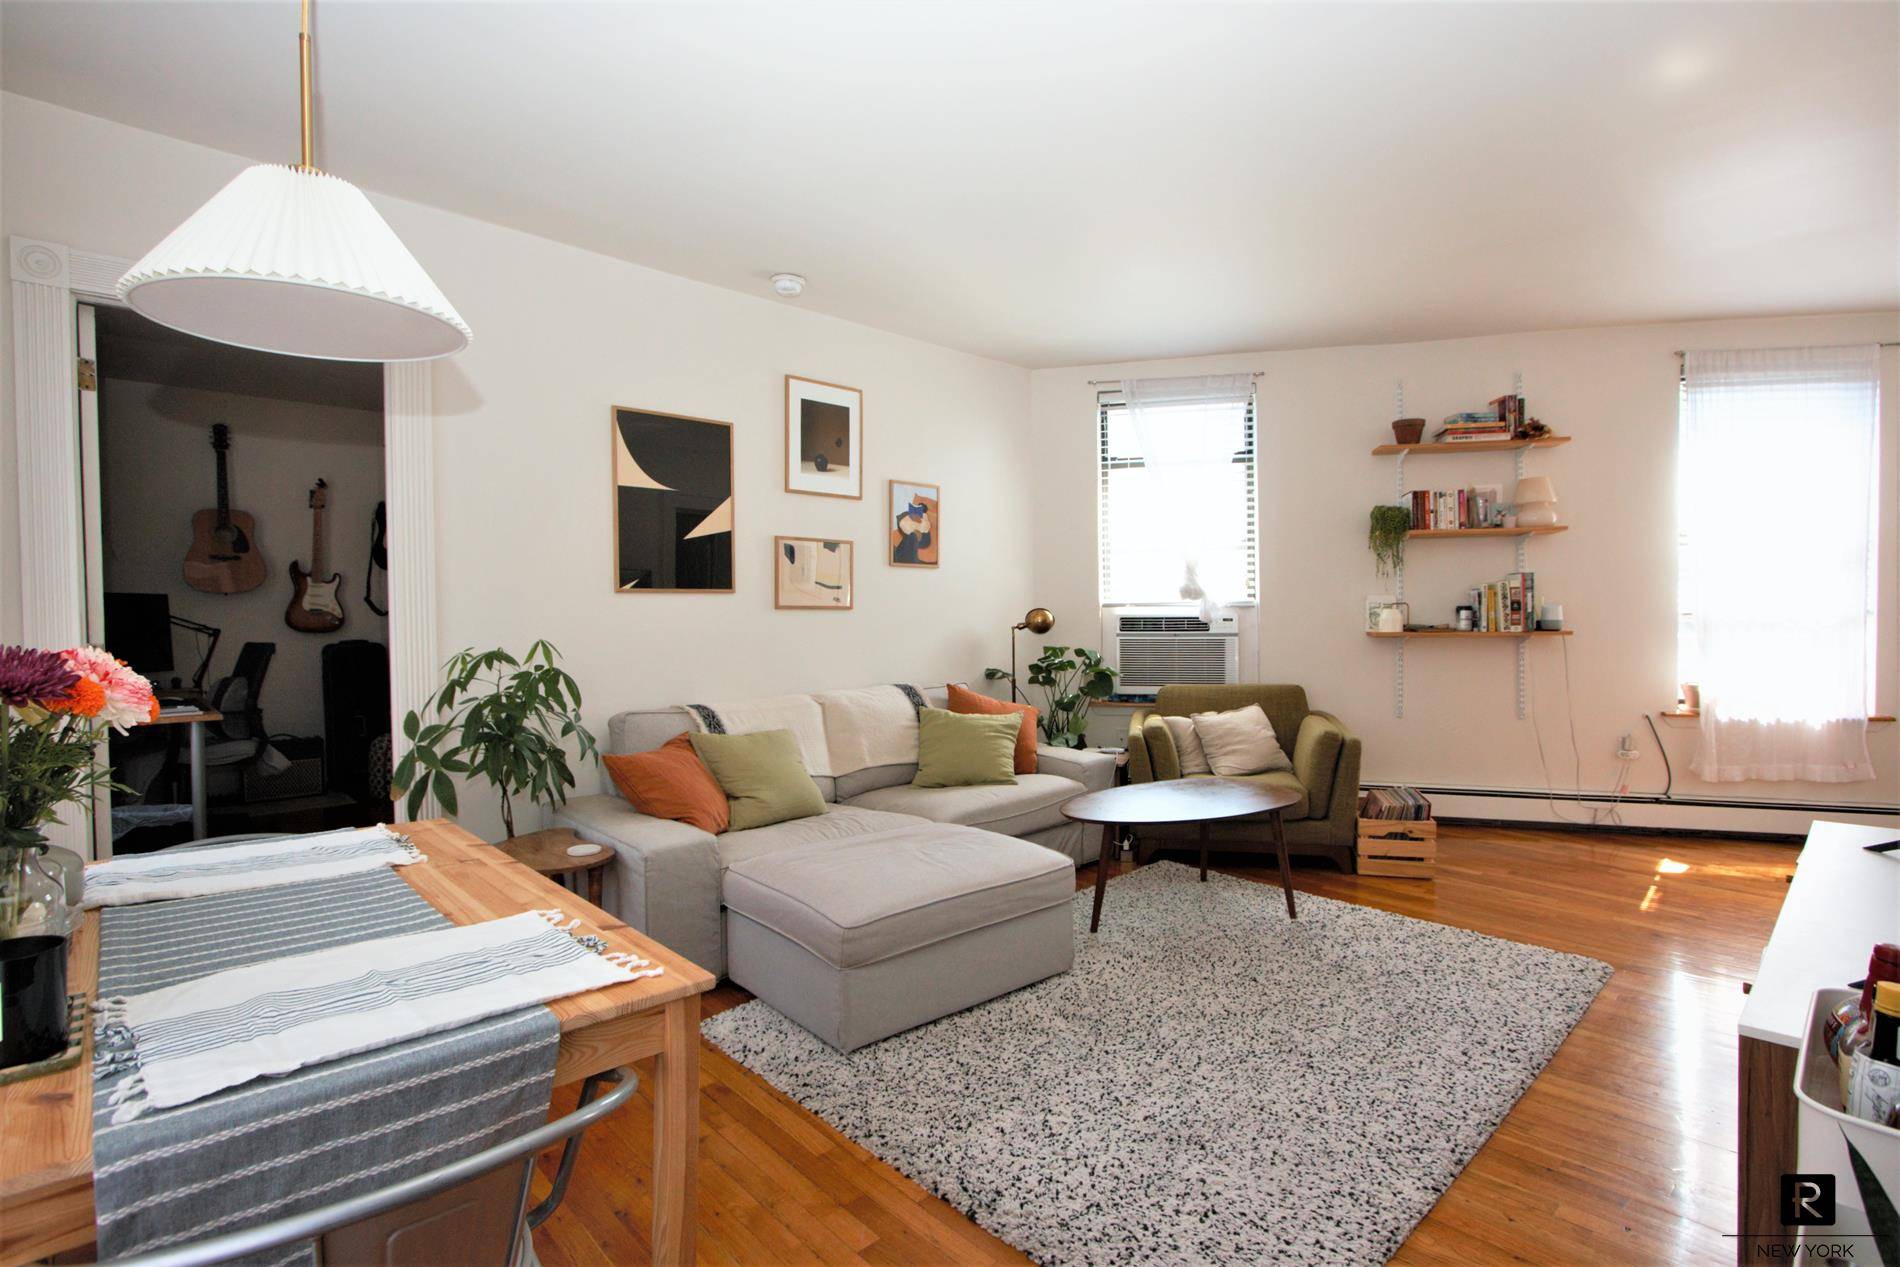 PET FRIENDLY Spacious 2 BED Steps to the 2 3 Subway in the Prime of Park Slope North on Tree Lit Bergen Street.